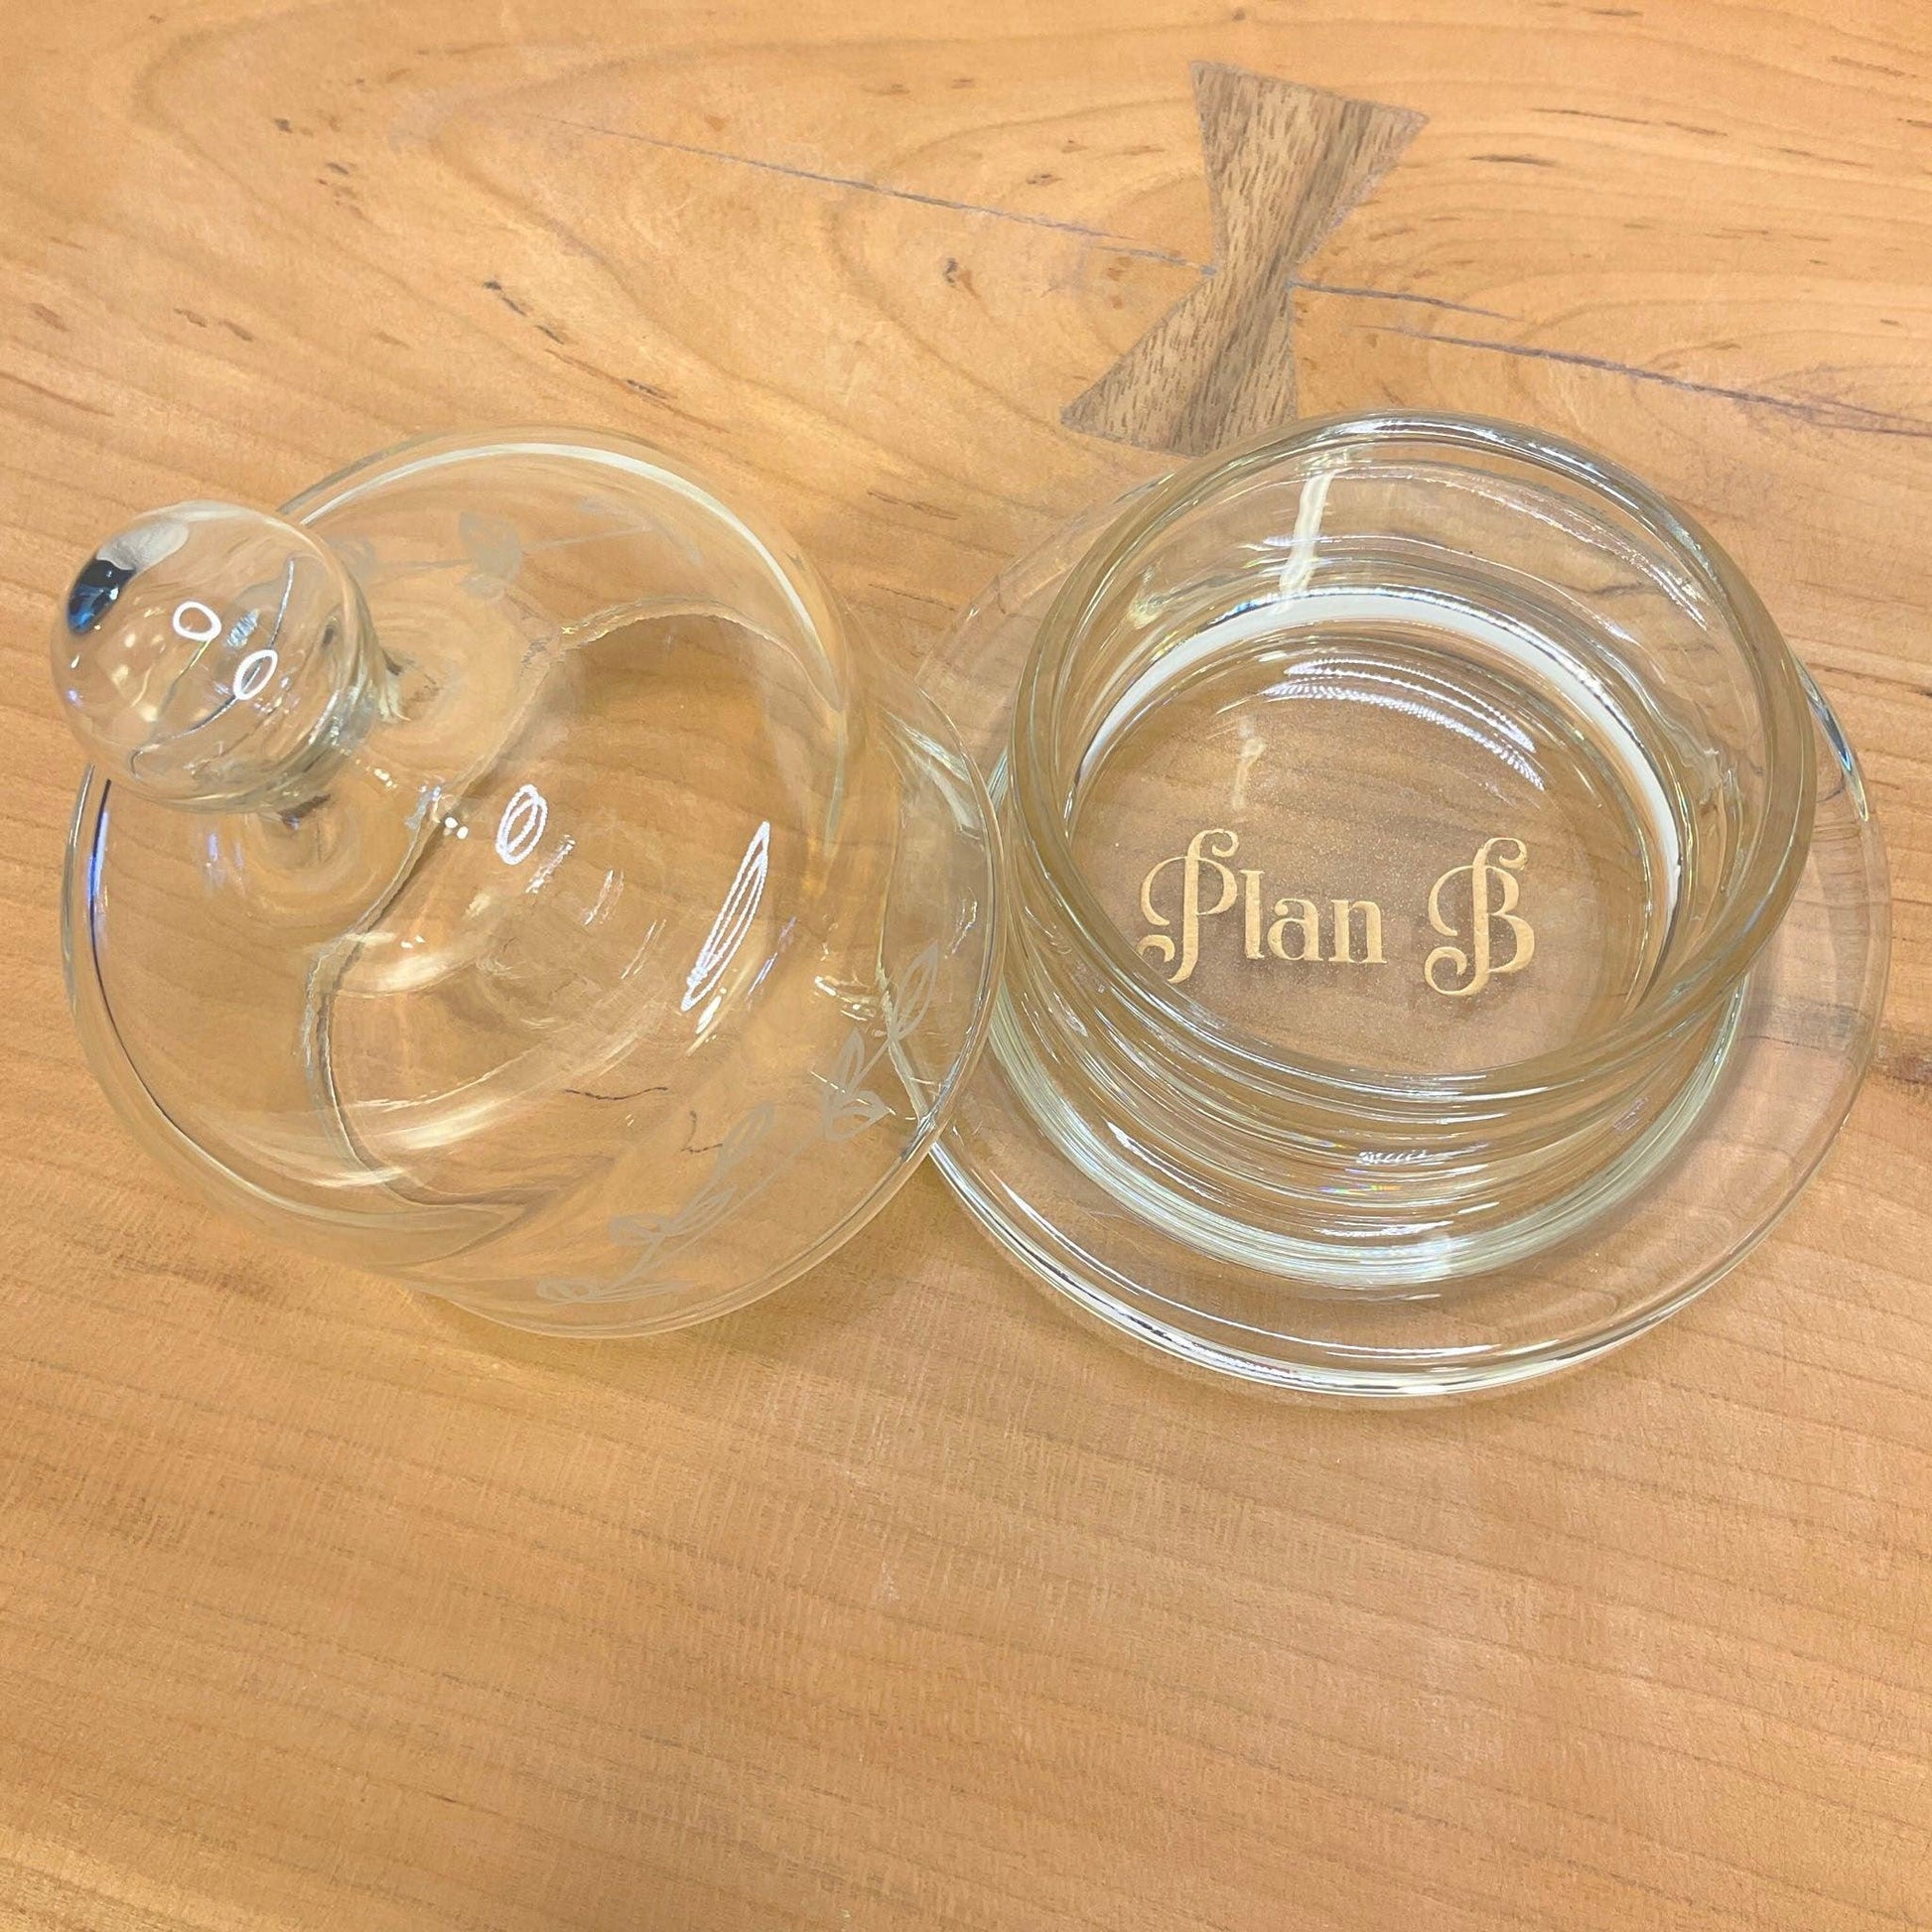 Plan B Jar - Offensively Domestic